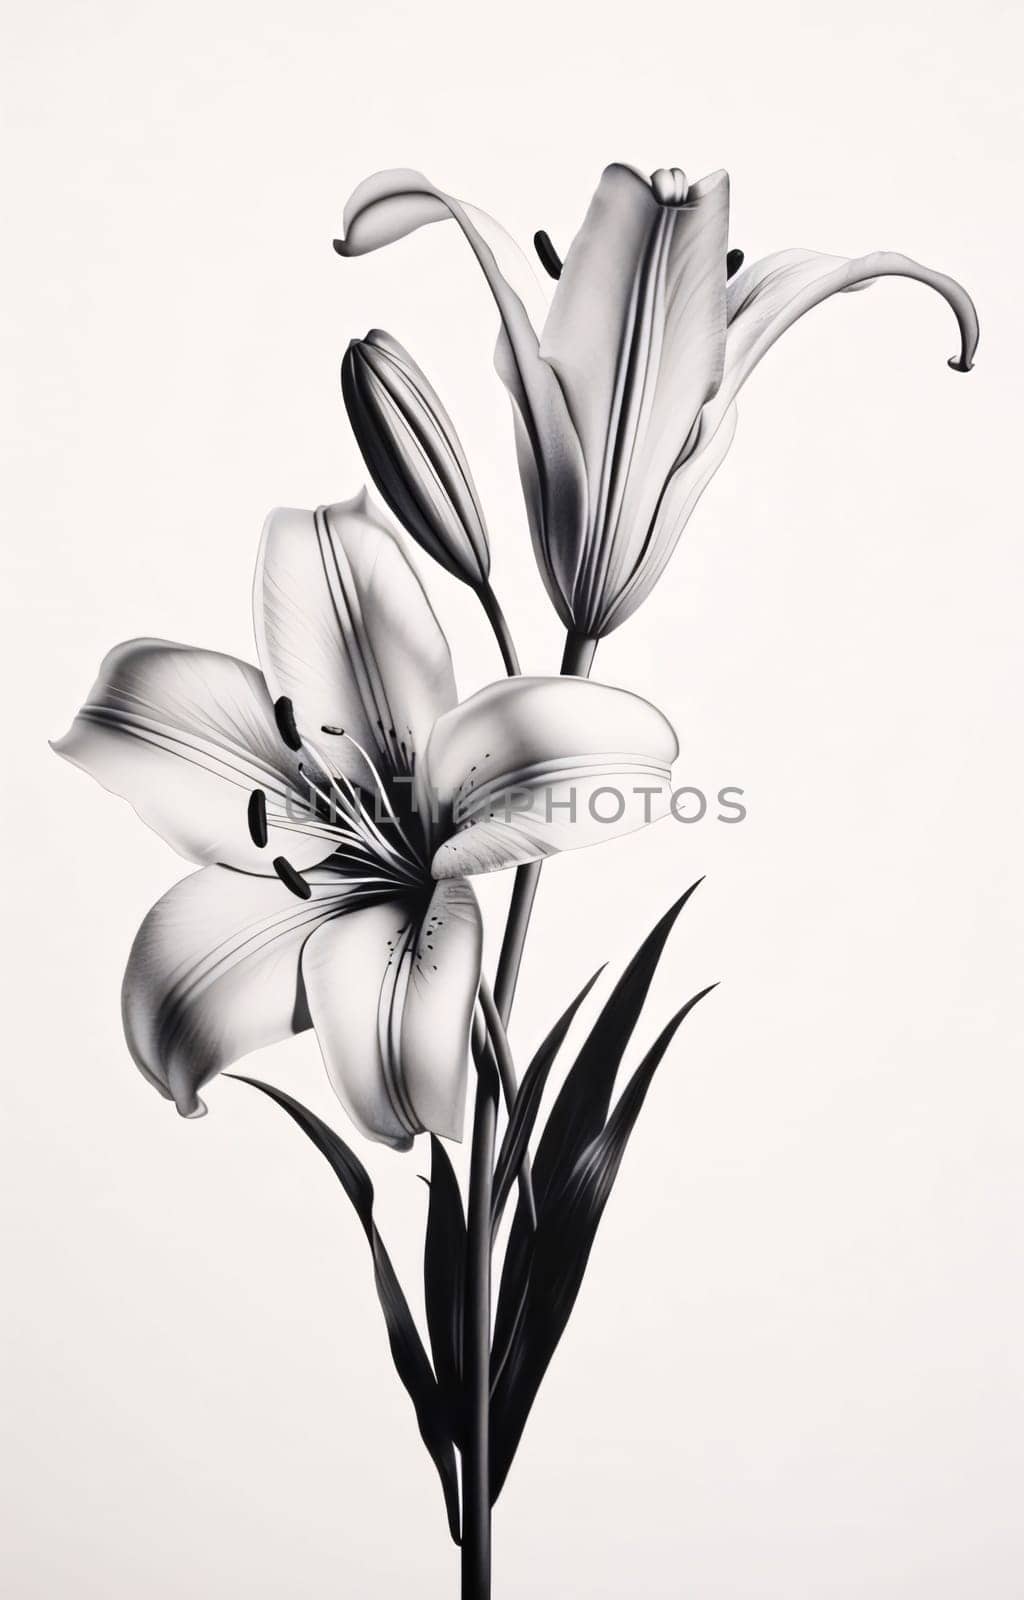 Black and white lilies on a white background. flower, leaves, stem. Flowering flowers, a symbol of spring, new life. by ThemesS